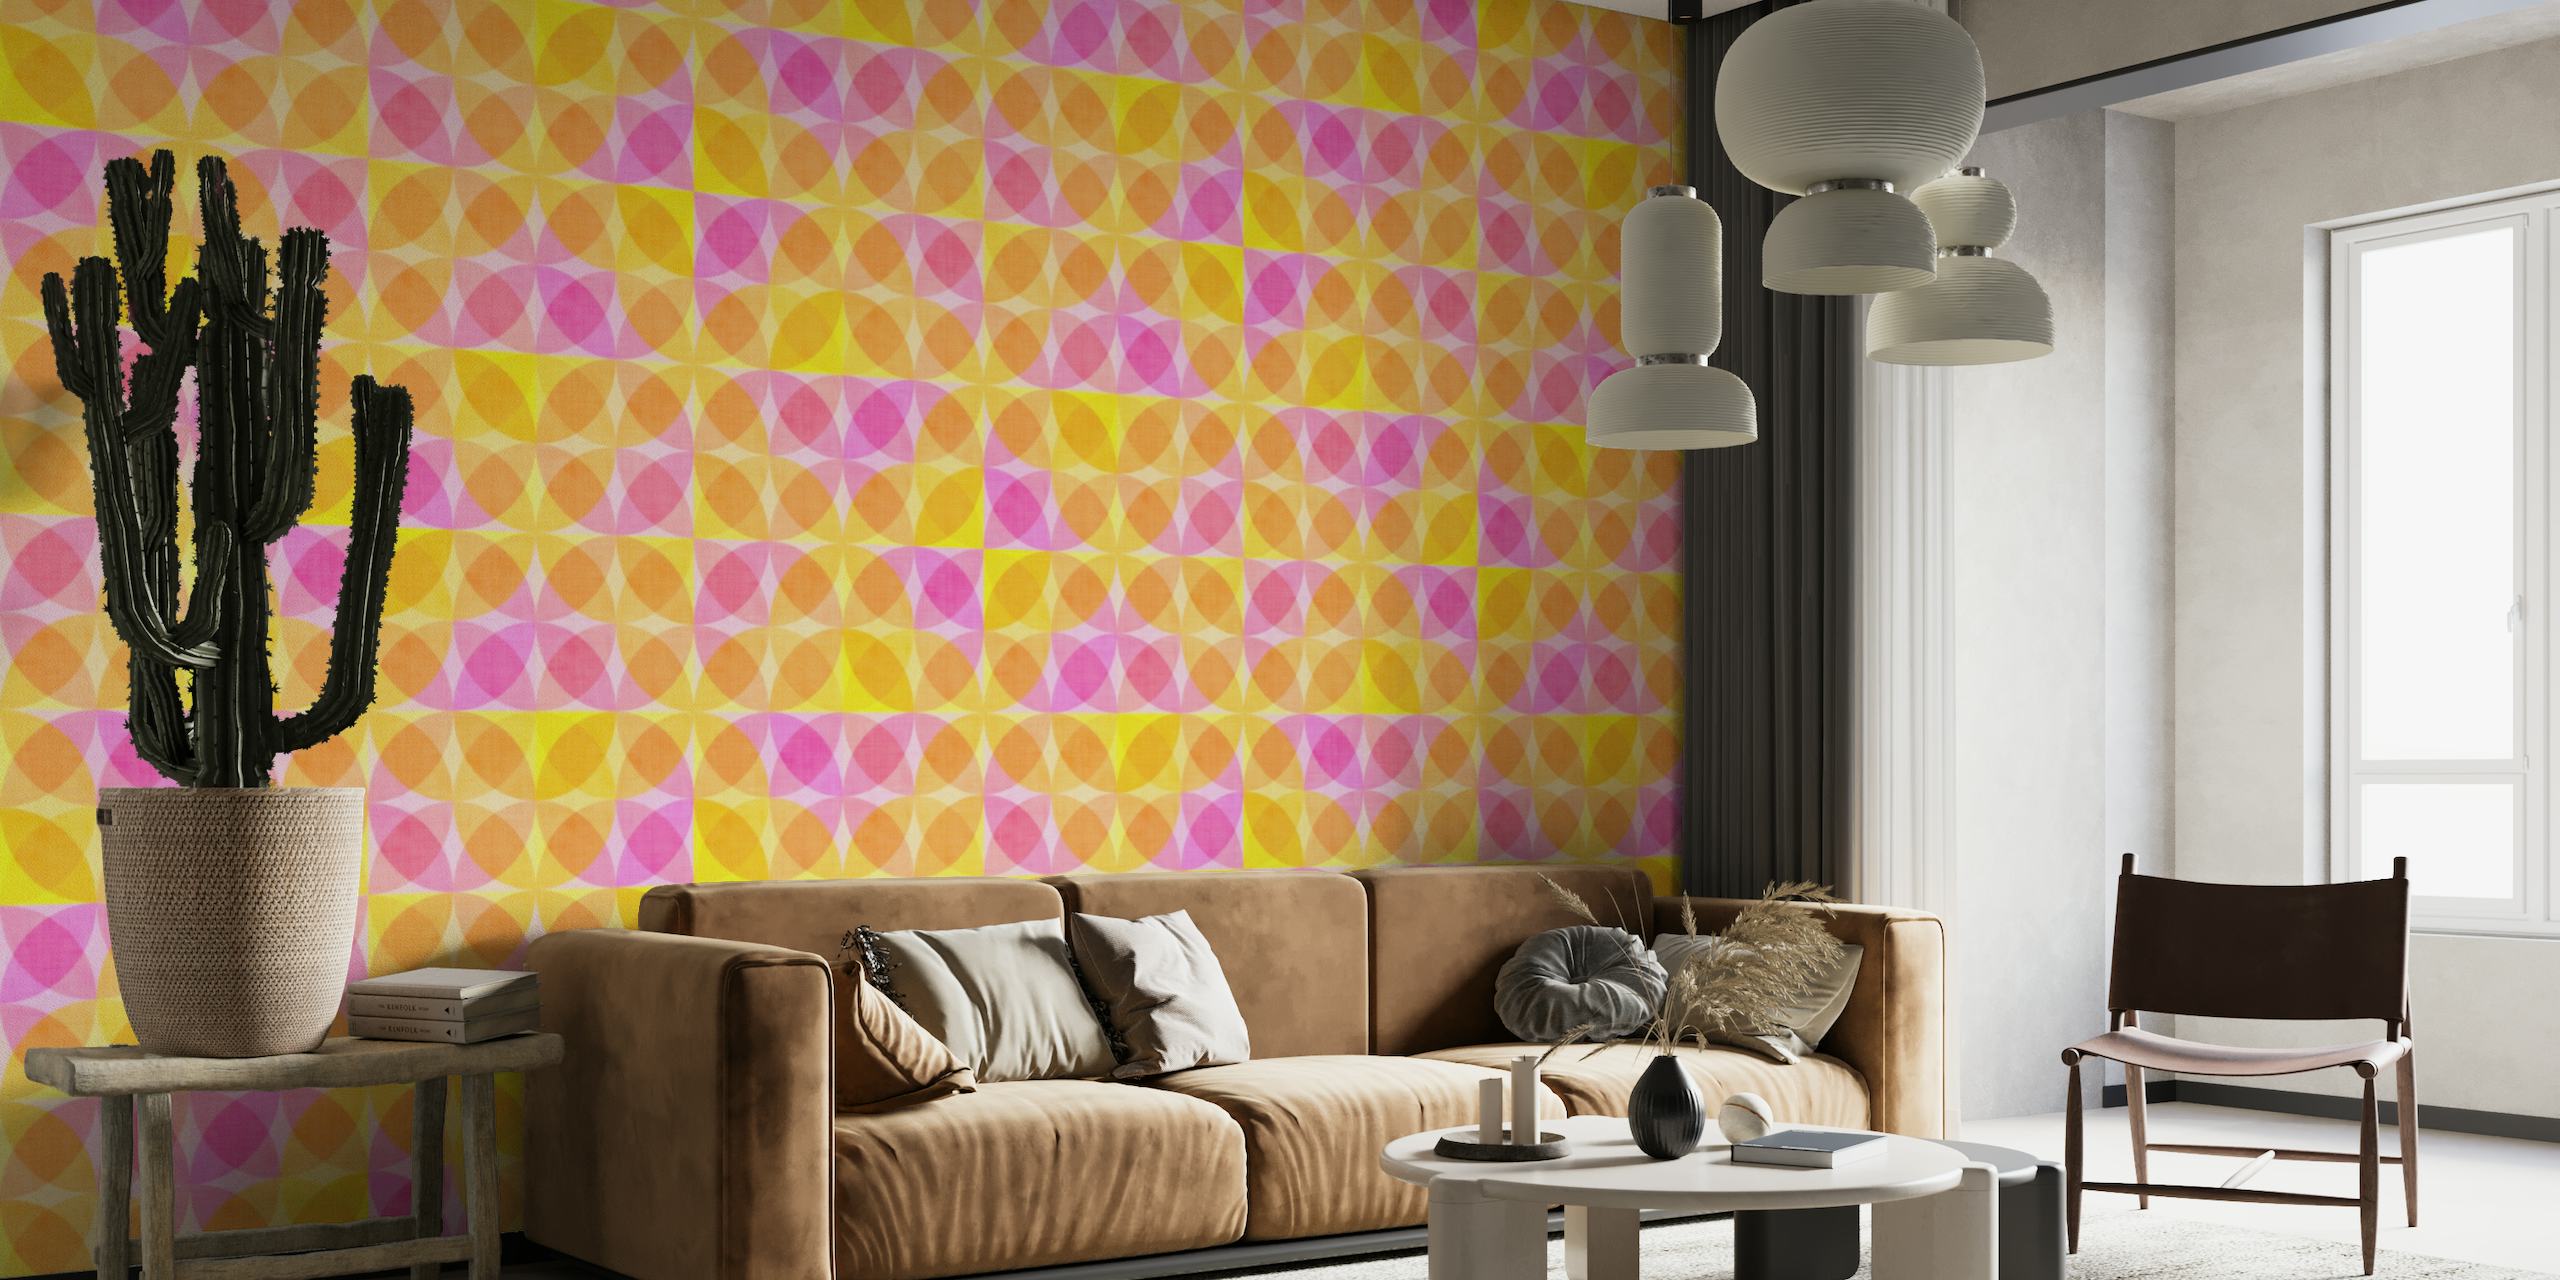 Party Geometric Shapes Pink Orange and Yellow papel de parede